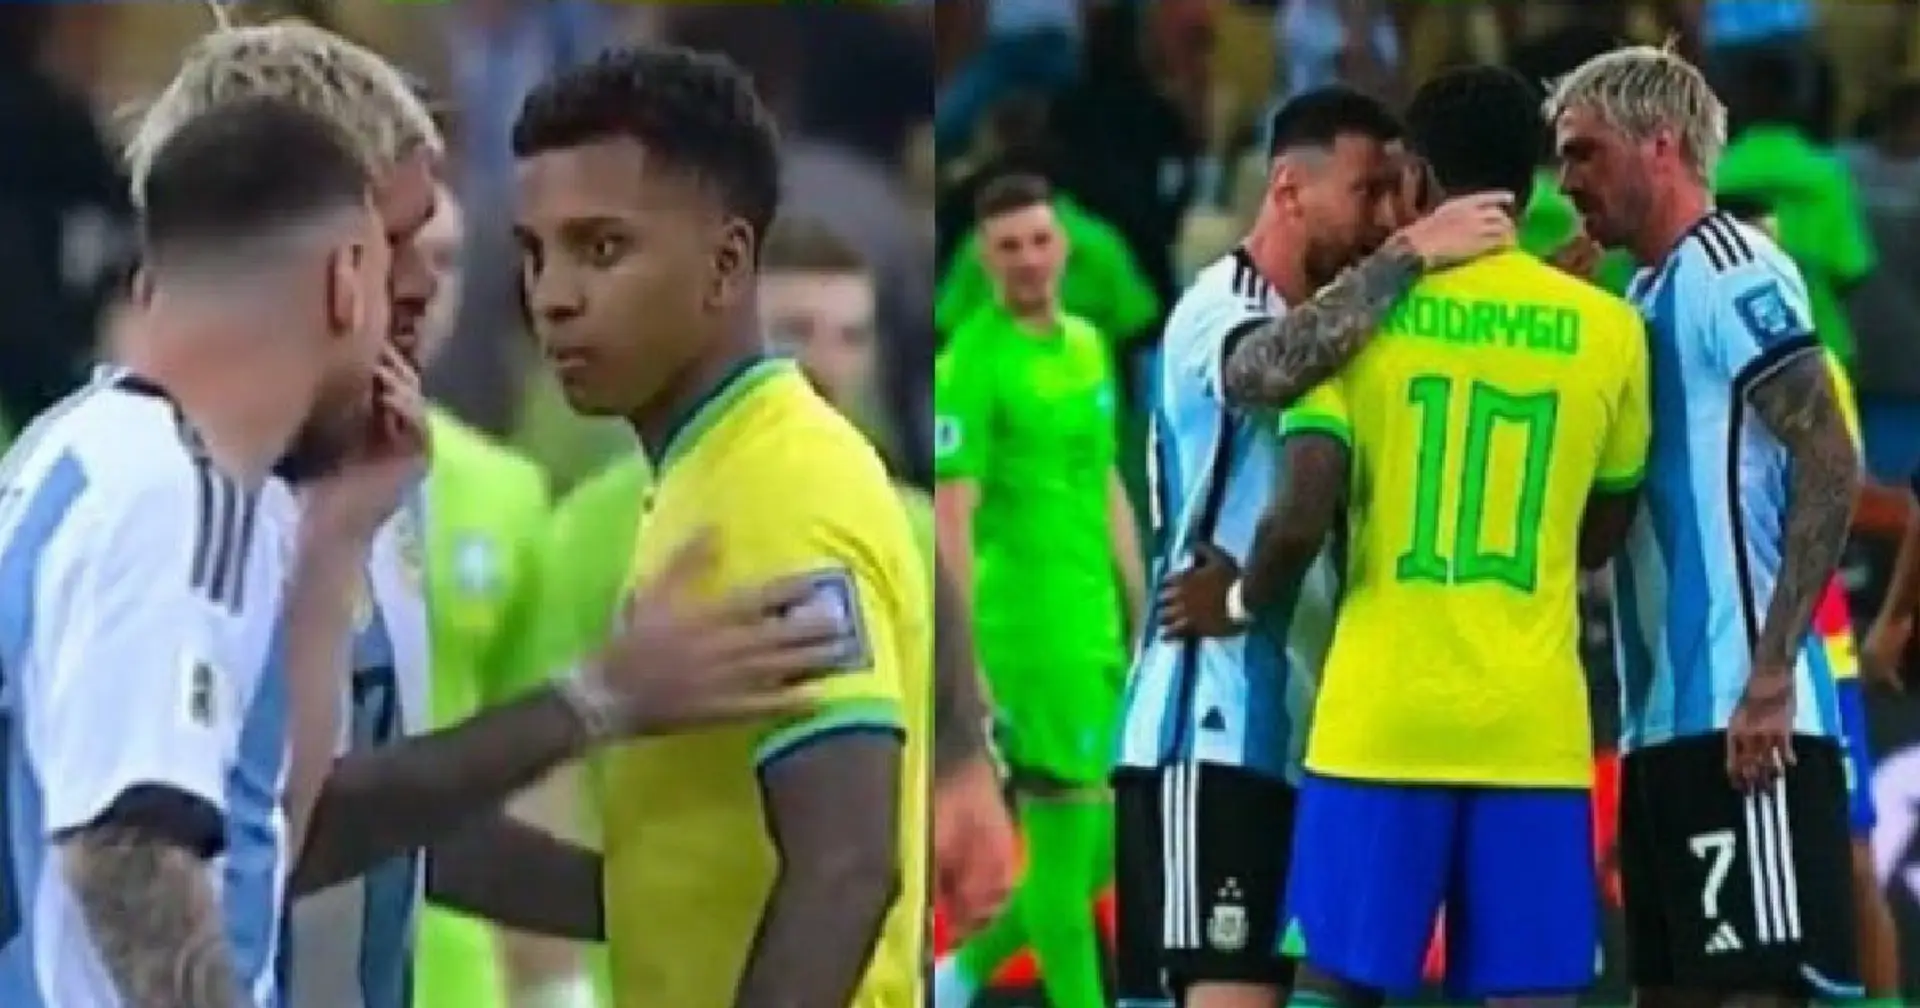 'Watch your mouth kid': How Messi silenced Rodrygo after heated exchange 